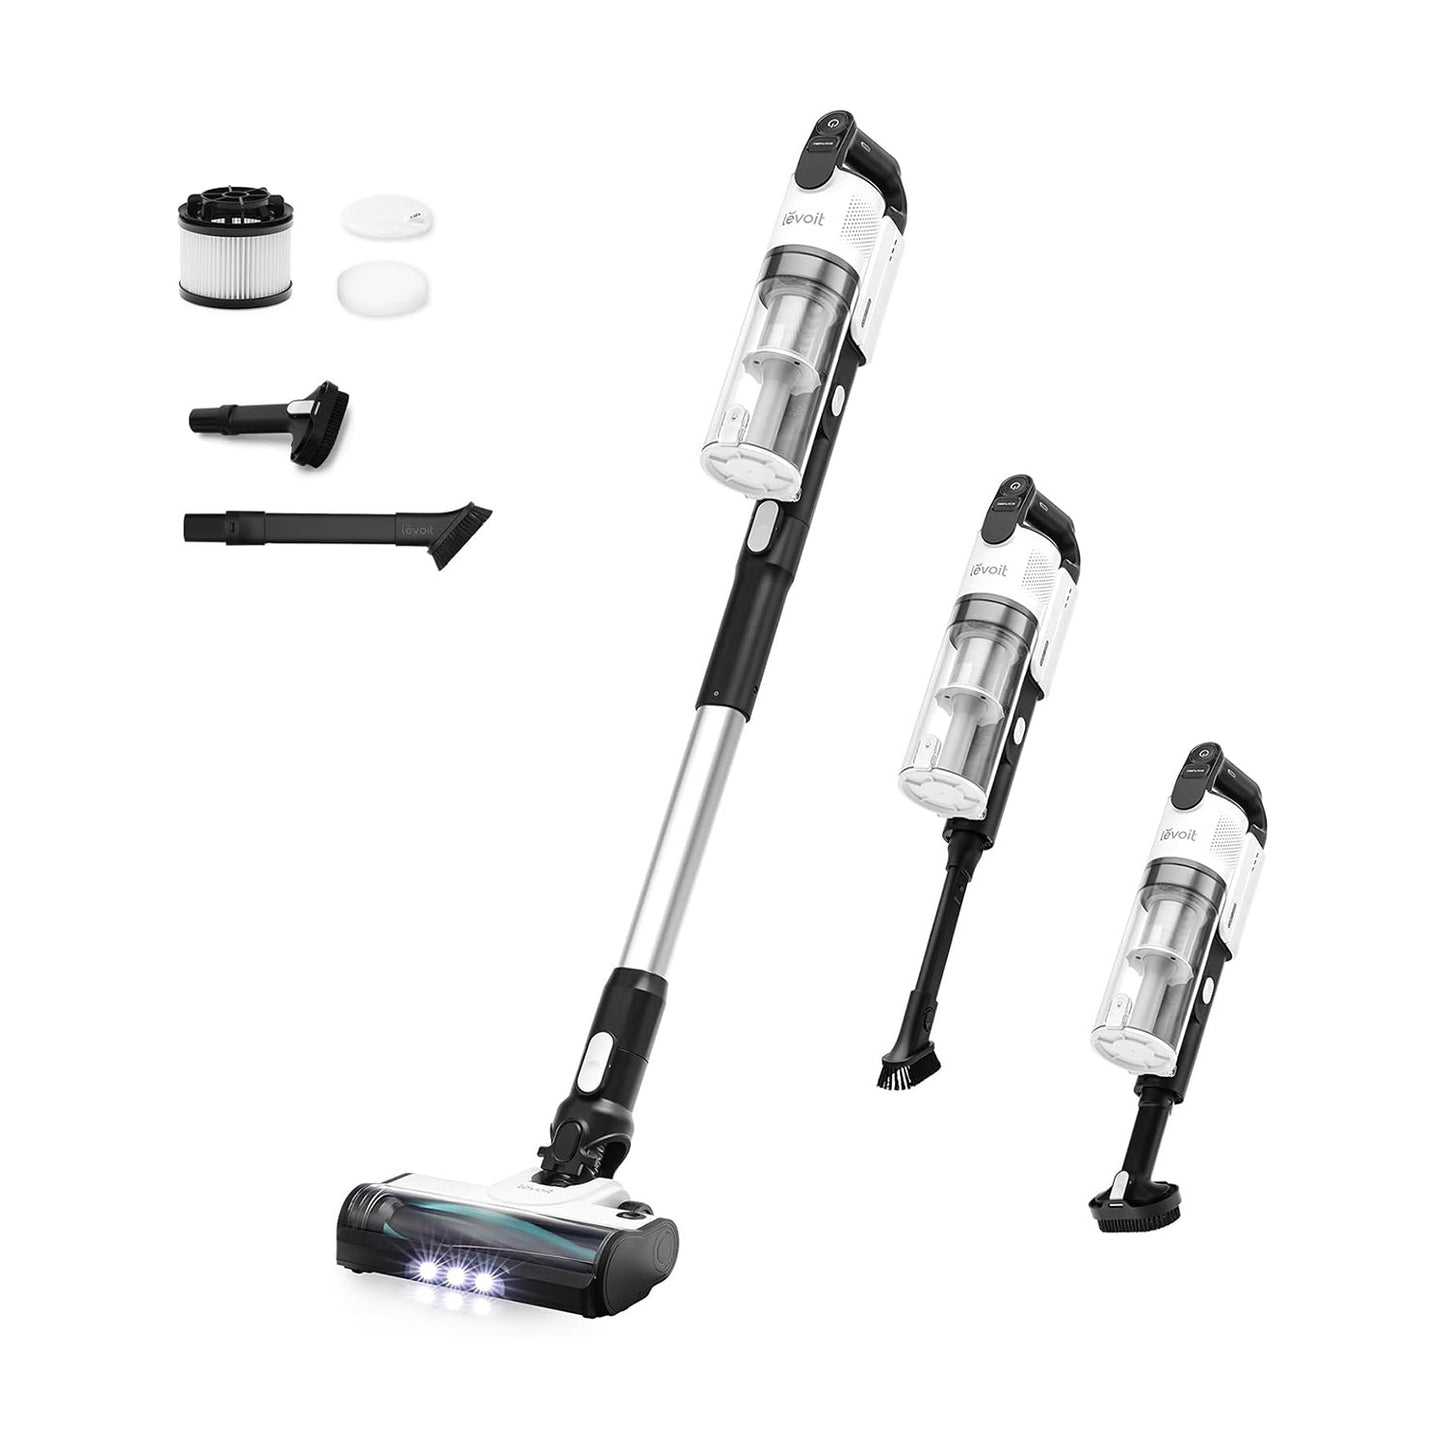 Cordless vacuum cleaner from Levoit